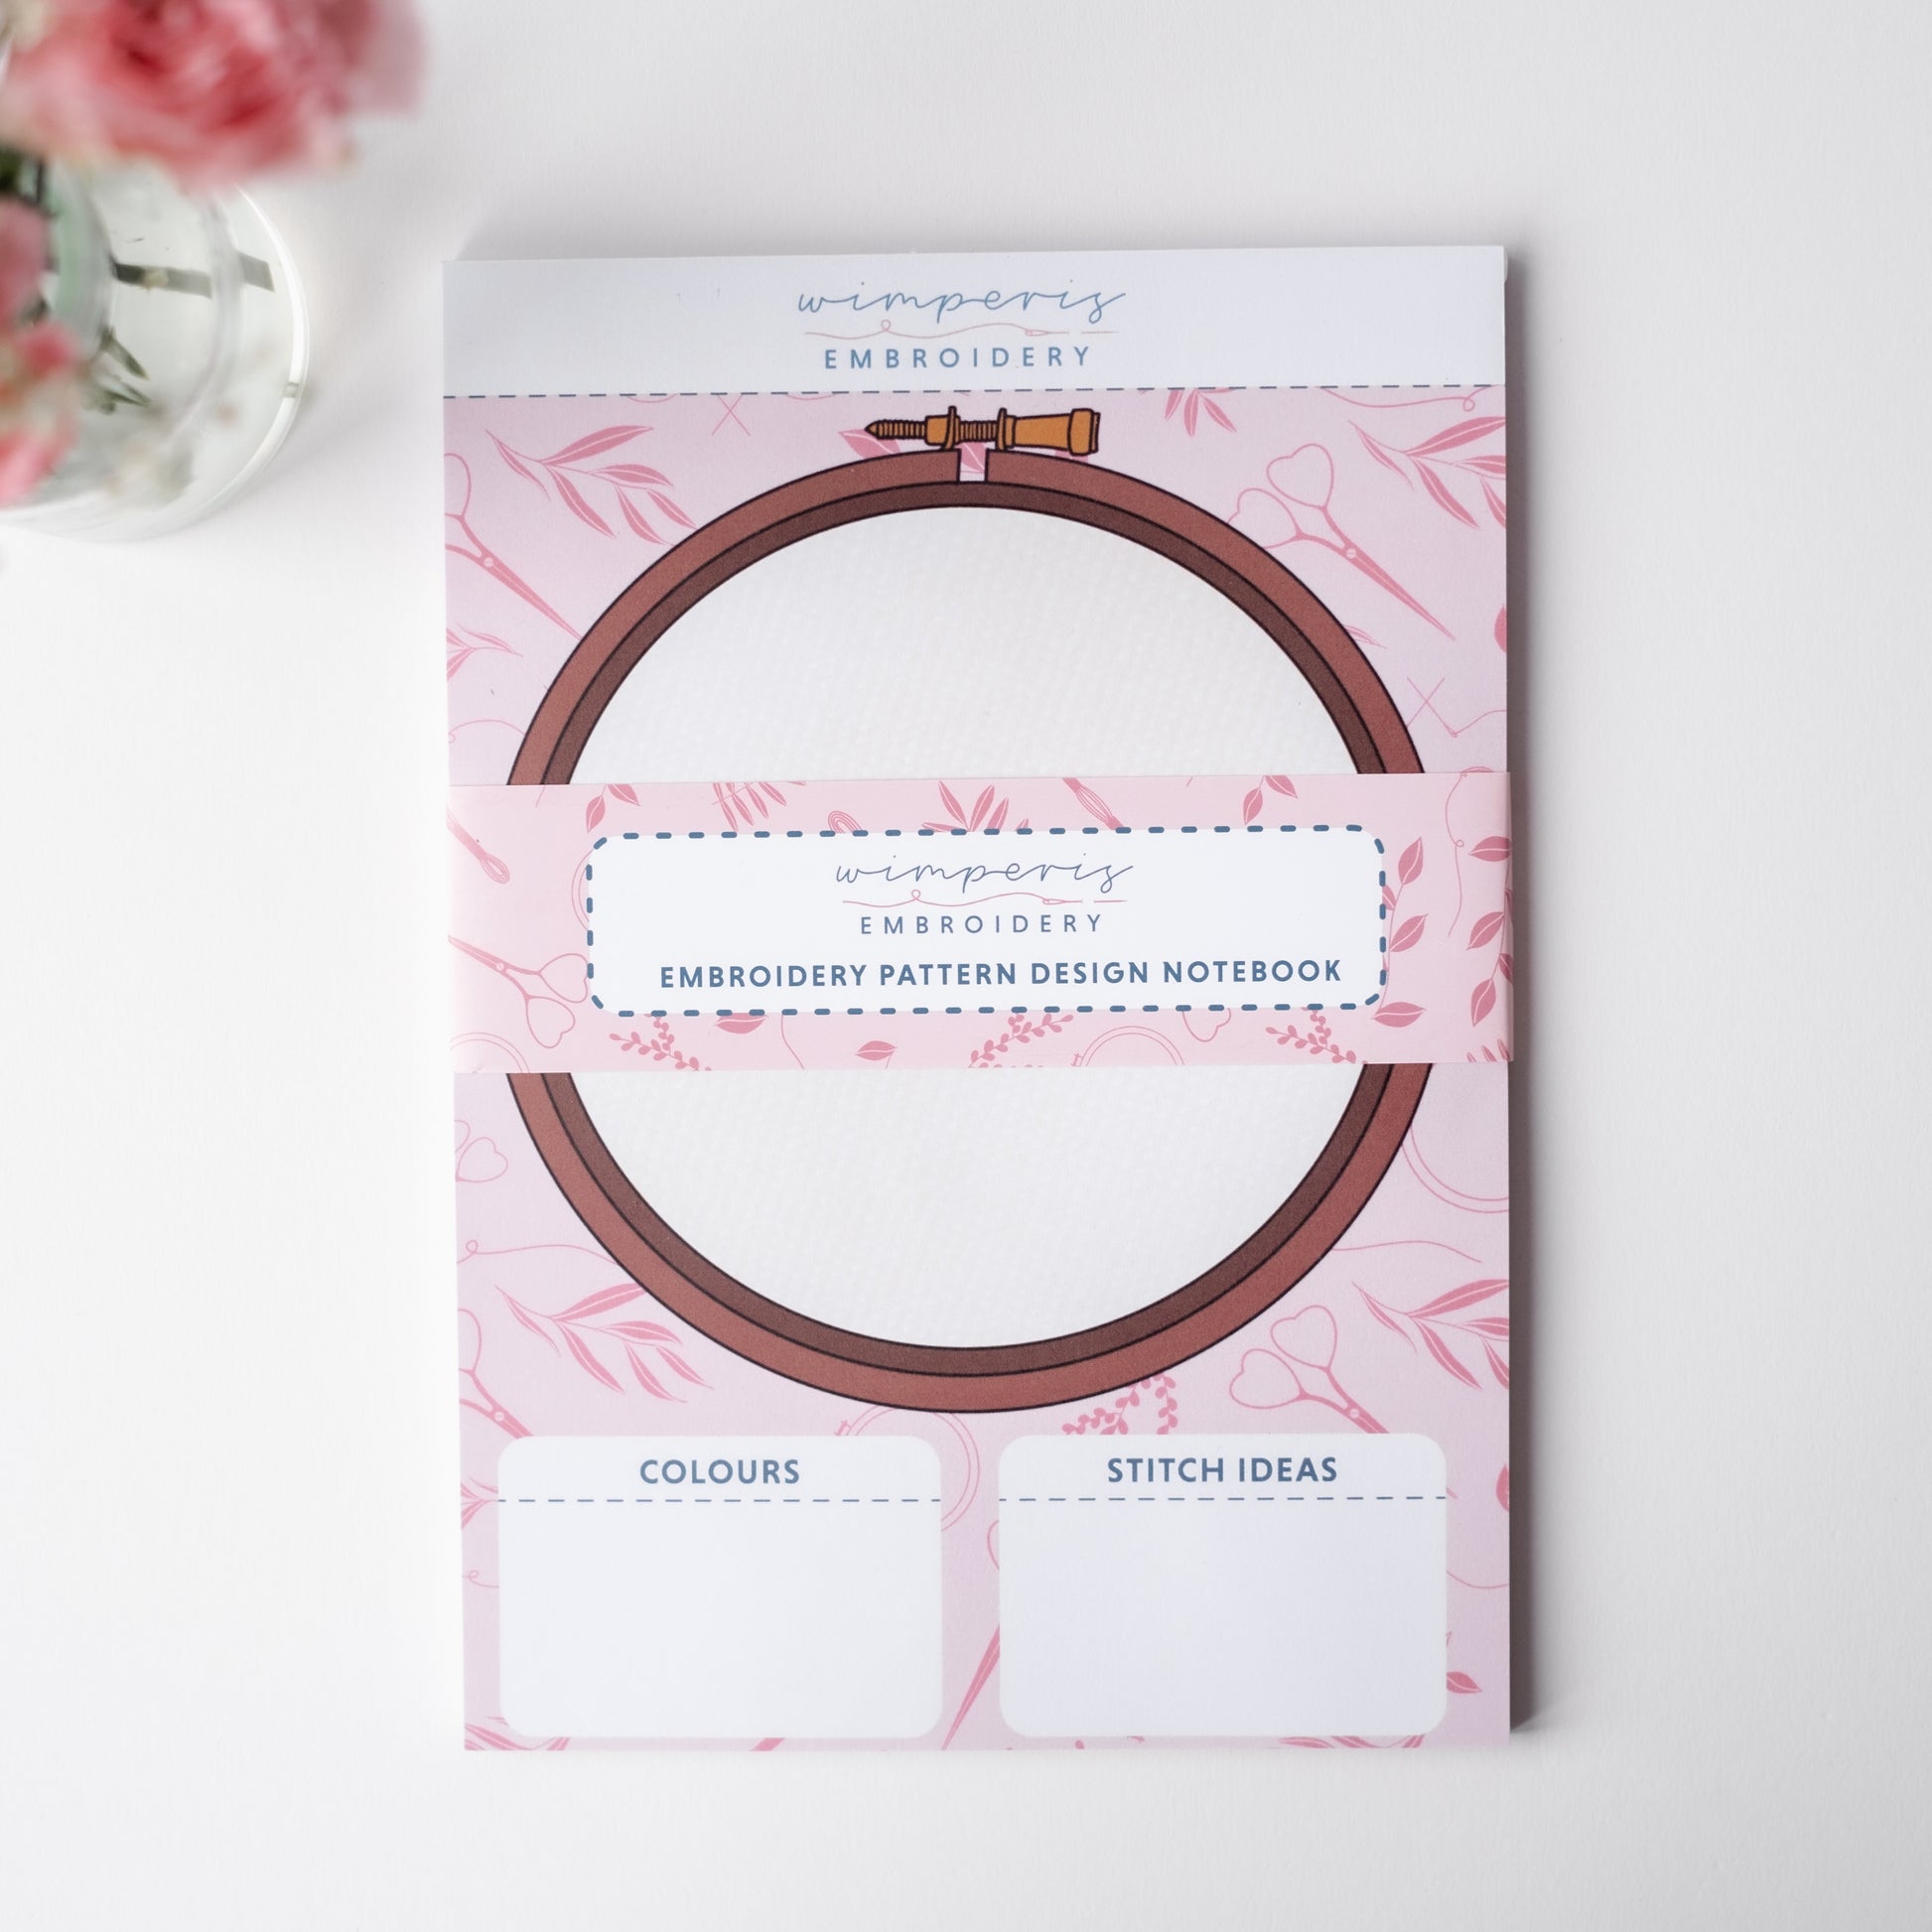 Embroidery pattern design notebook, features drawn embroidery hoop, a space to put colour options and one to put stitch type ideas.